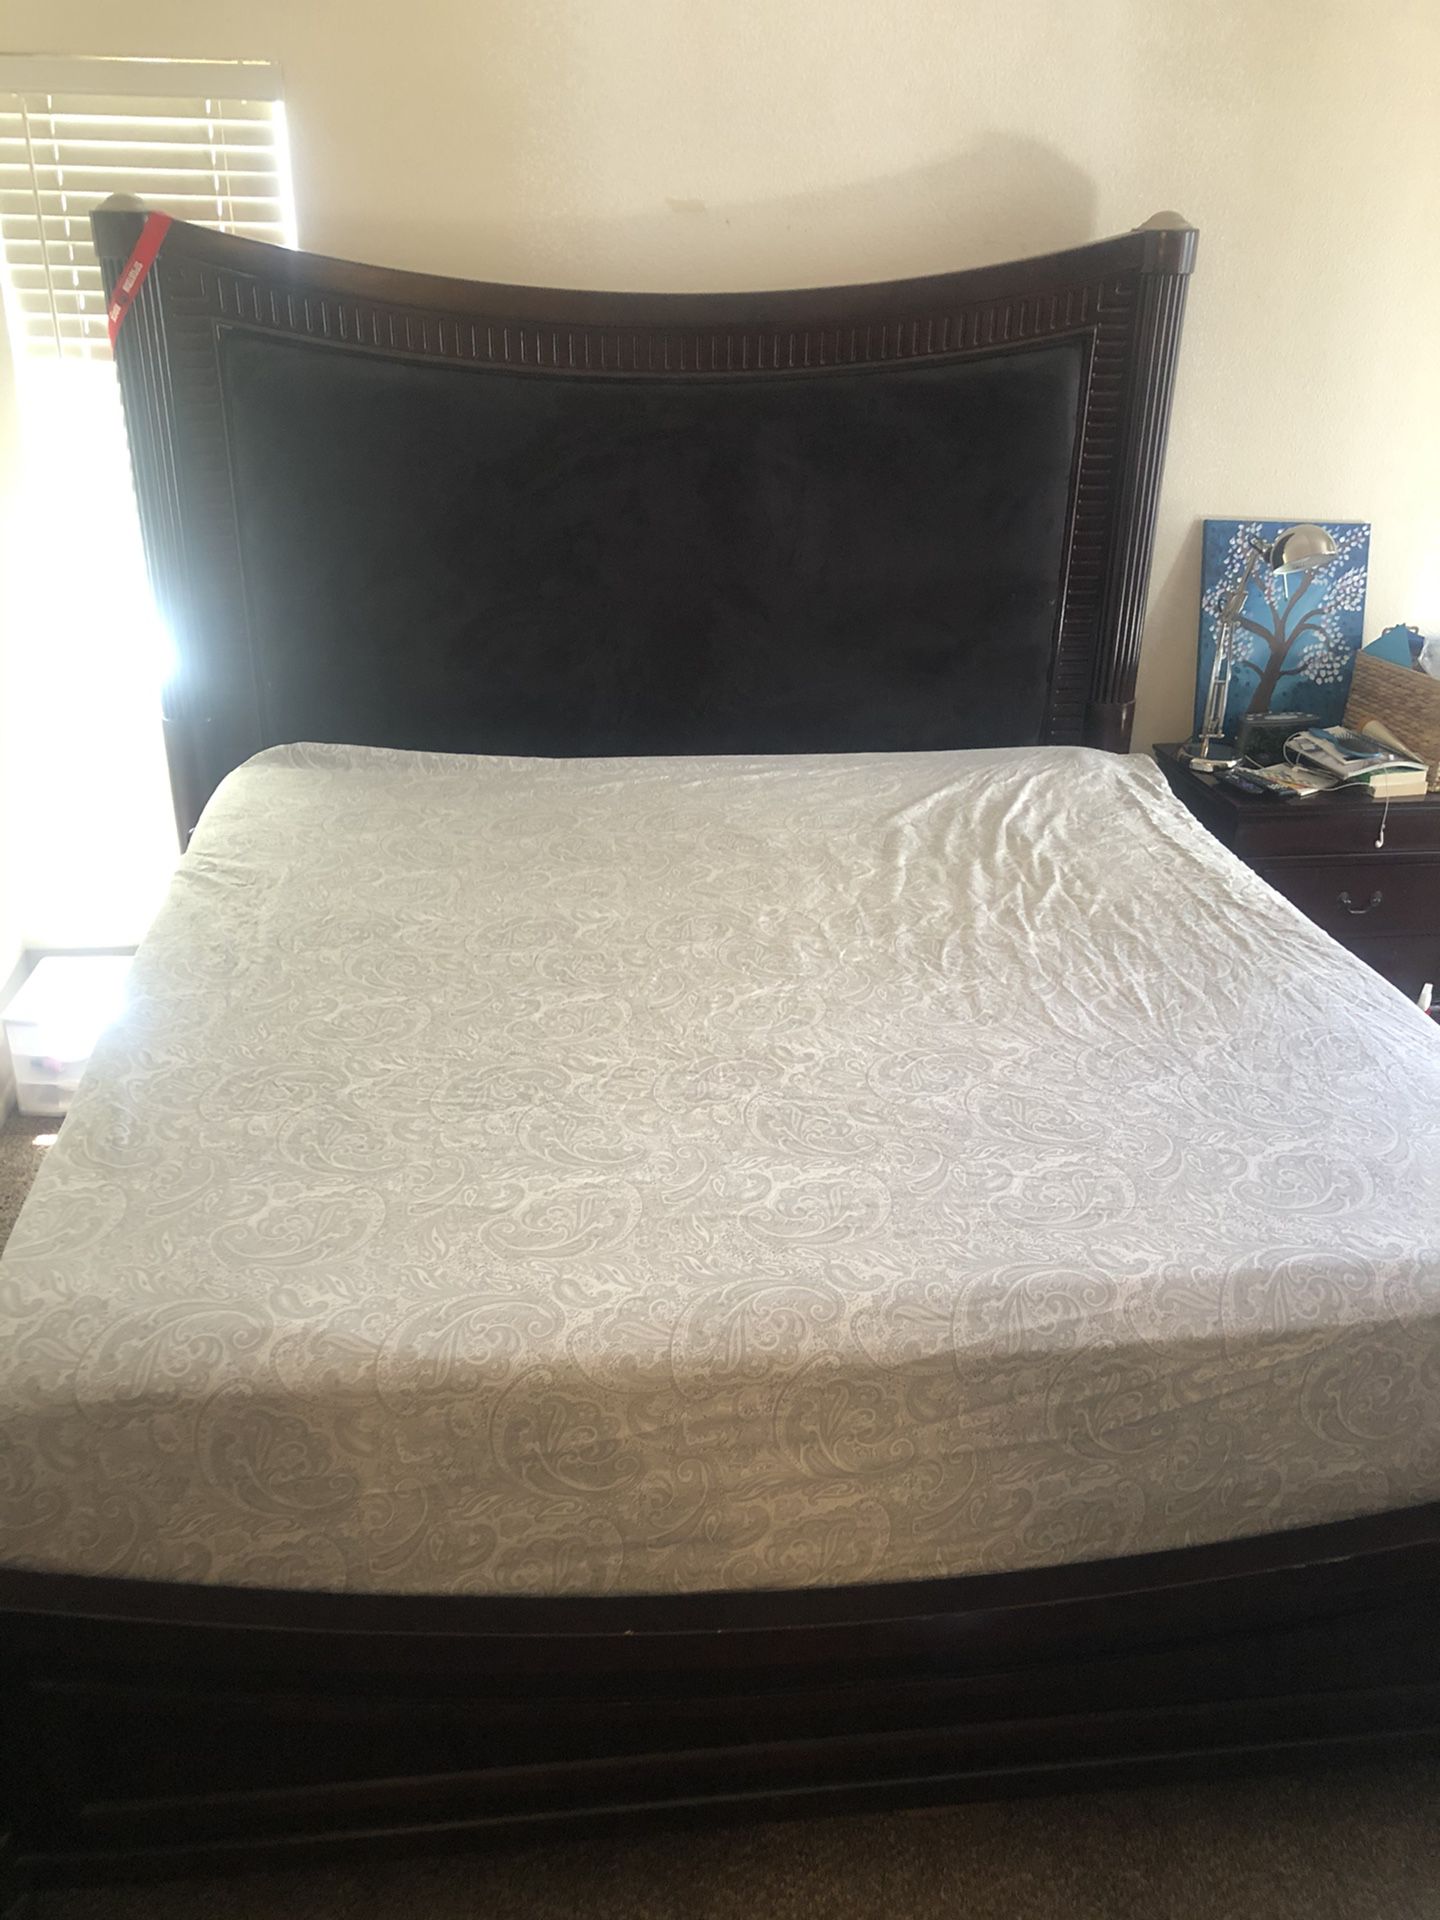 Eastern king bed frame- moving soon, will consider all offers